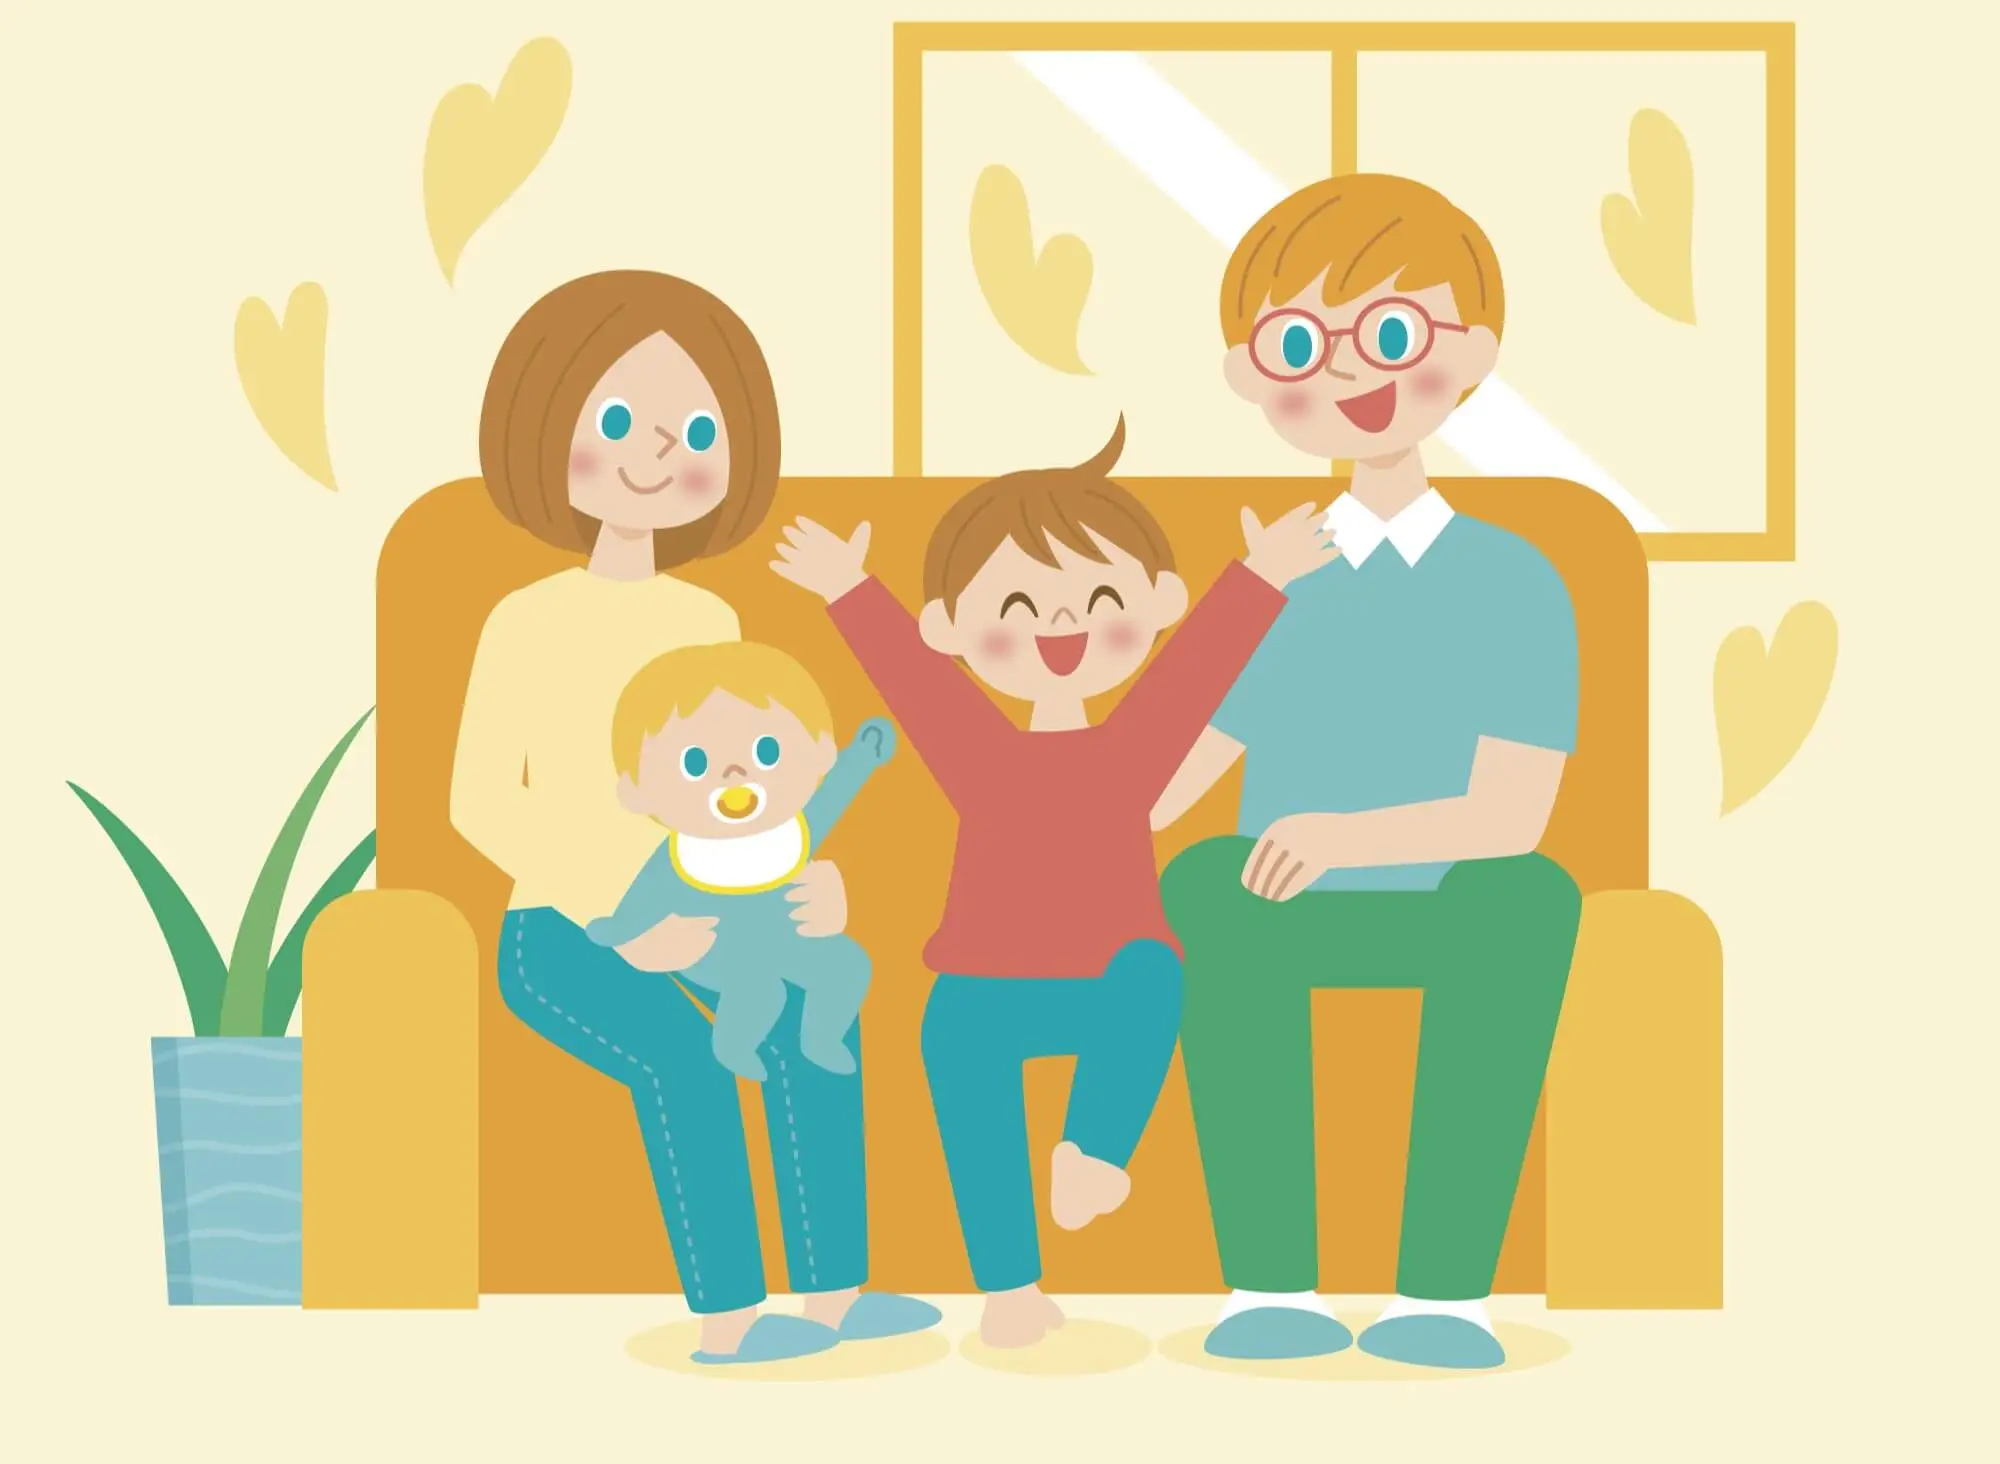 Happy family sitting on a couch with parents and two young children, representing a supportive parenting environment.